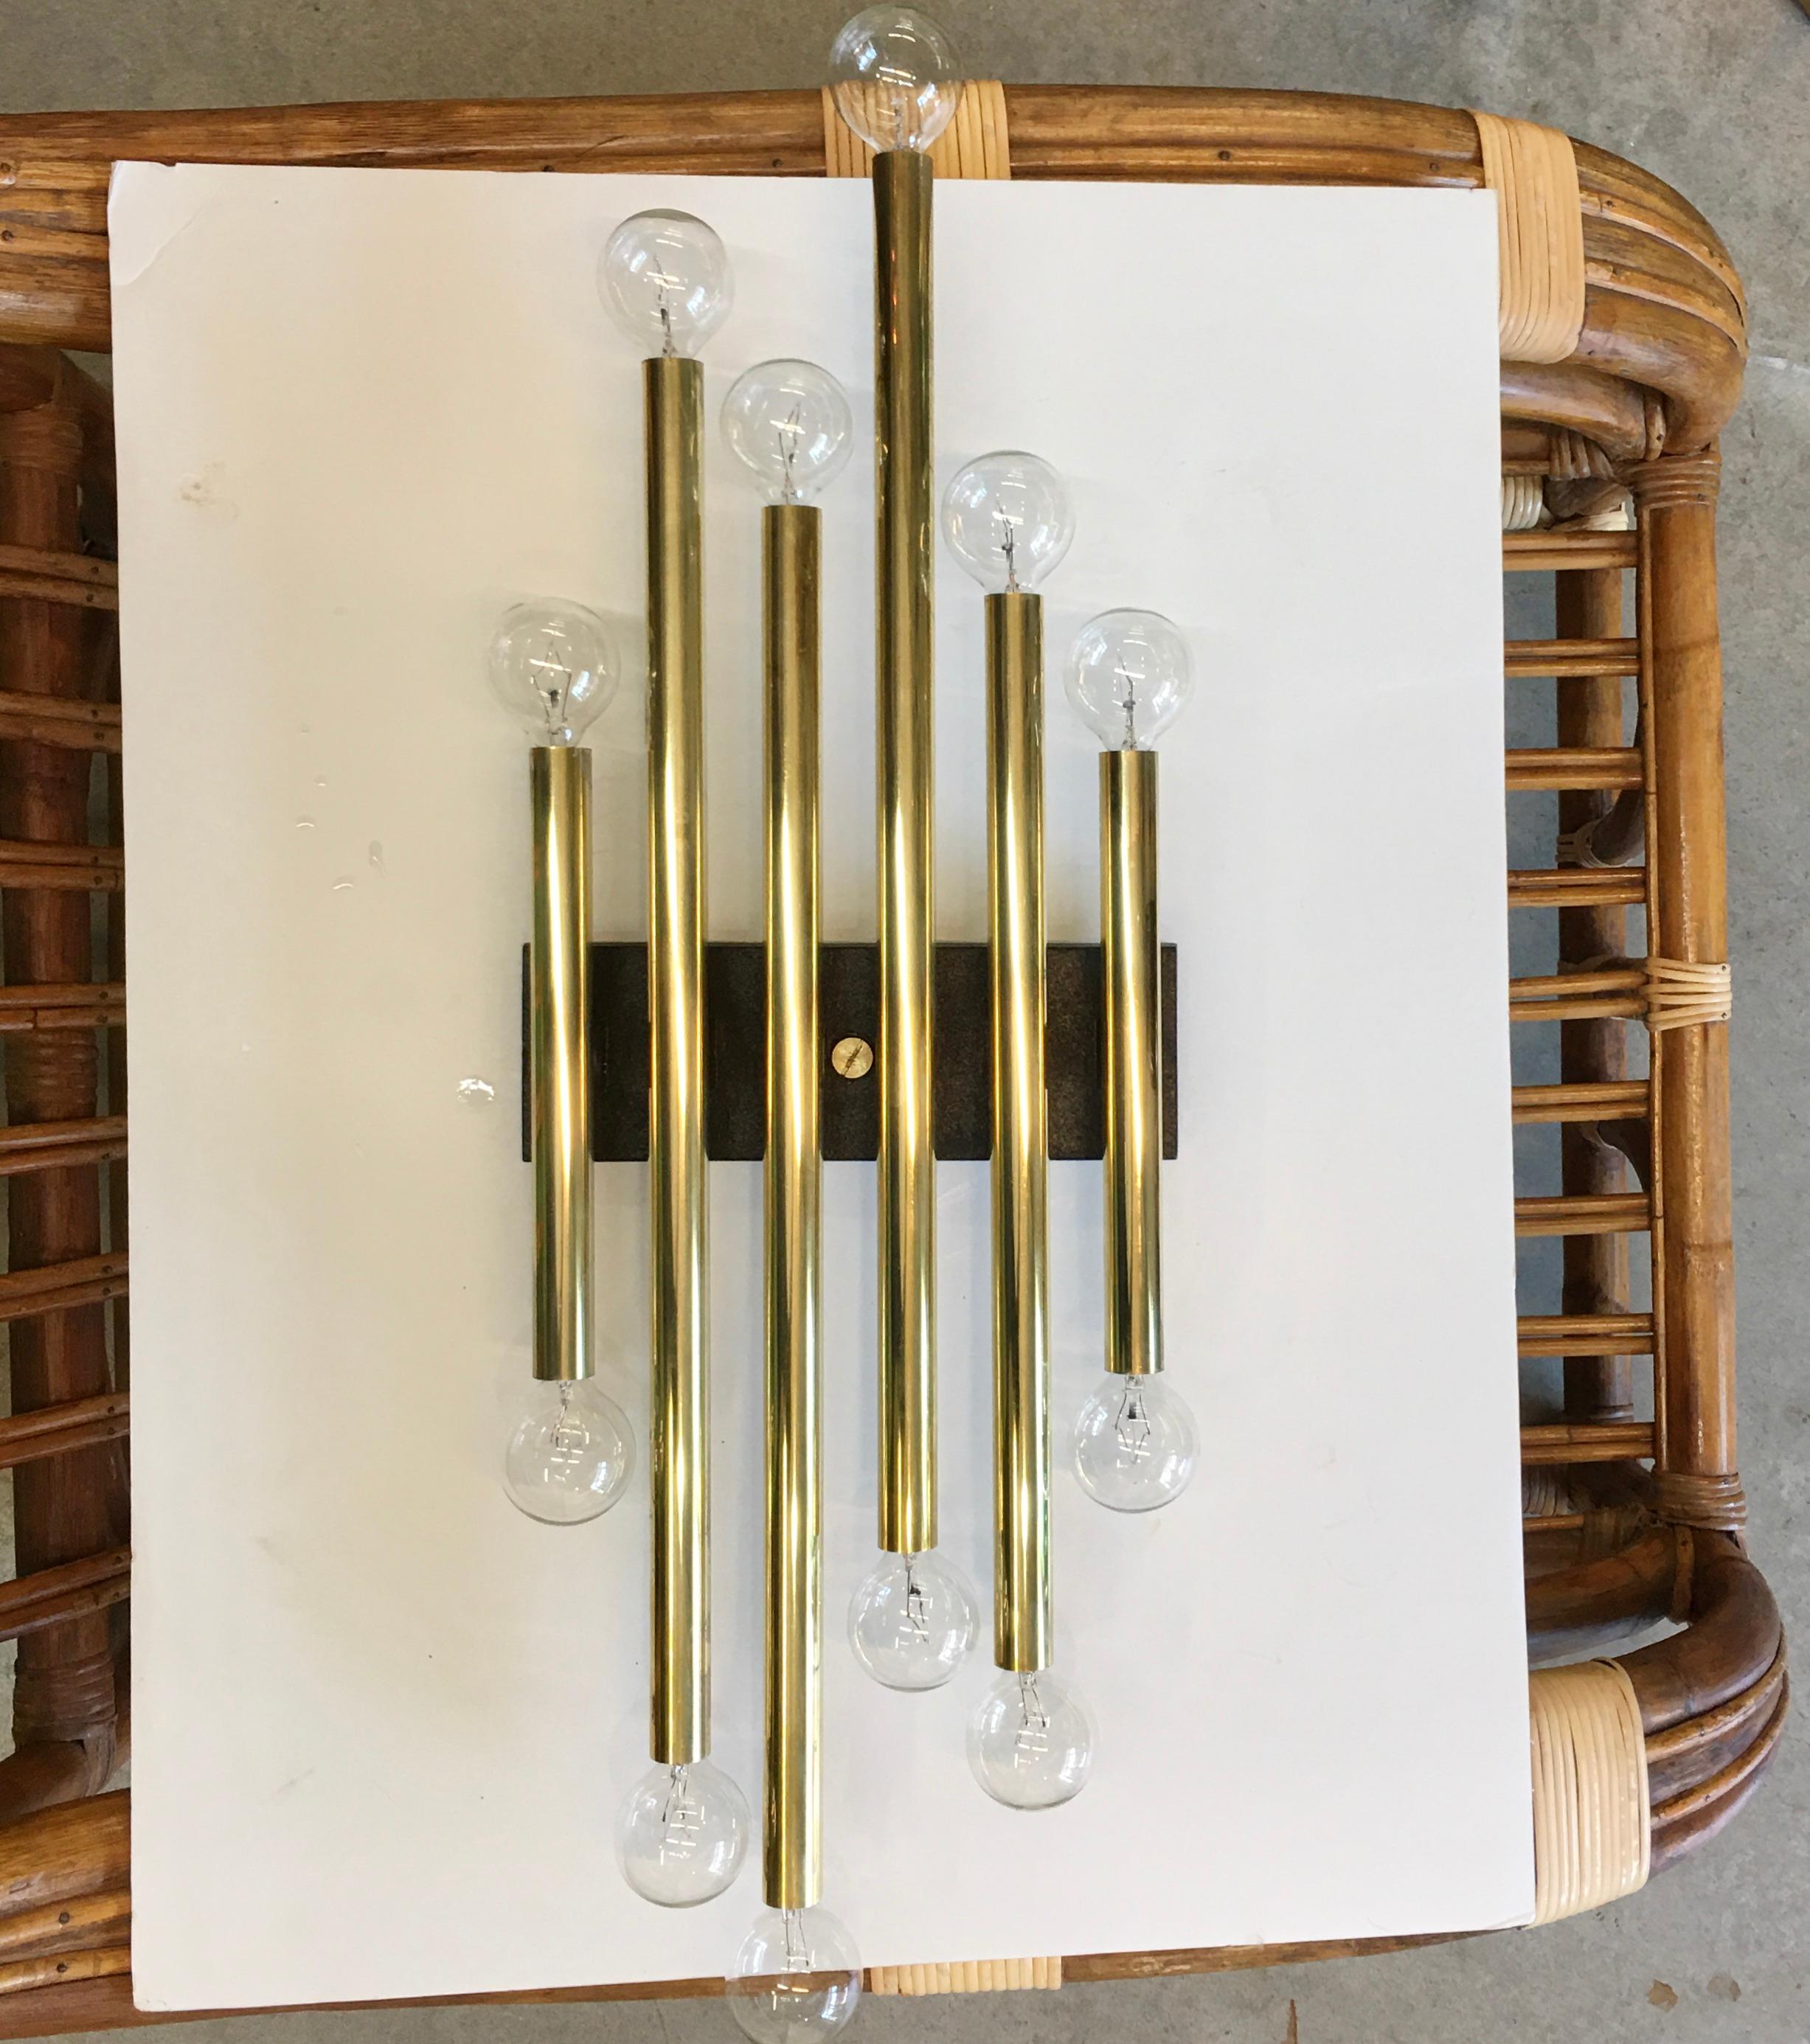 Gaetano Sciolari designed the Tubular Collection for Lightolier in the 1960s. Here we present model 4686 multi-tubular brass wall sconce designed by Gaetano Sciolari and produced by Lightolier in 1966. Original label present. See detail images from